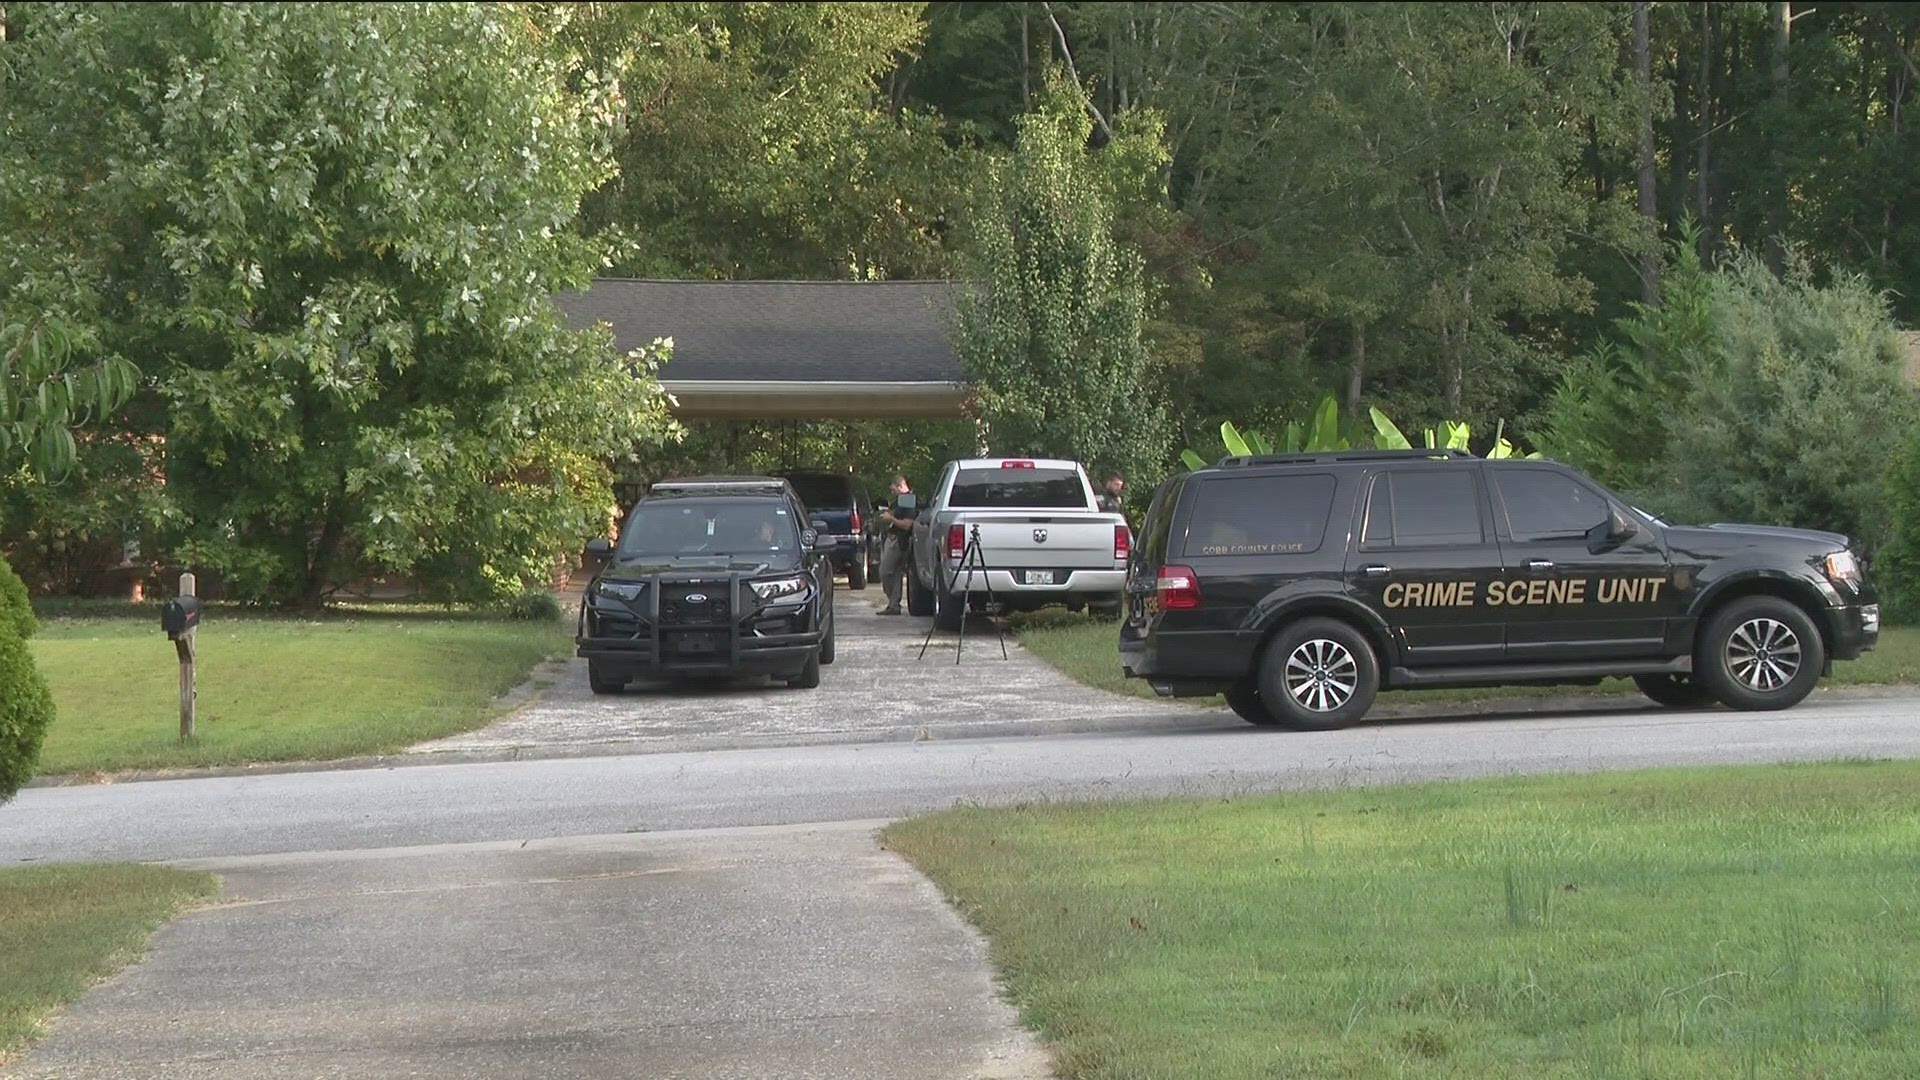 Cobb County Police Launched Homicide Investigation Following Man's Fatal Shot in Car